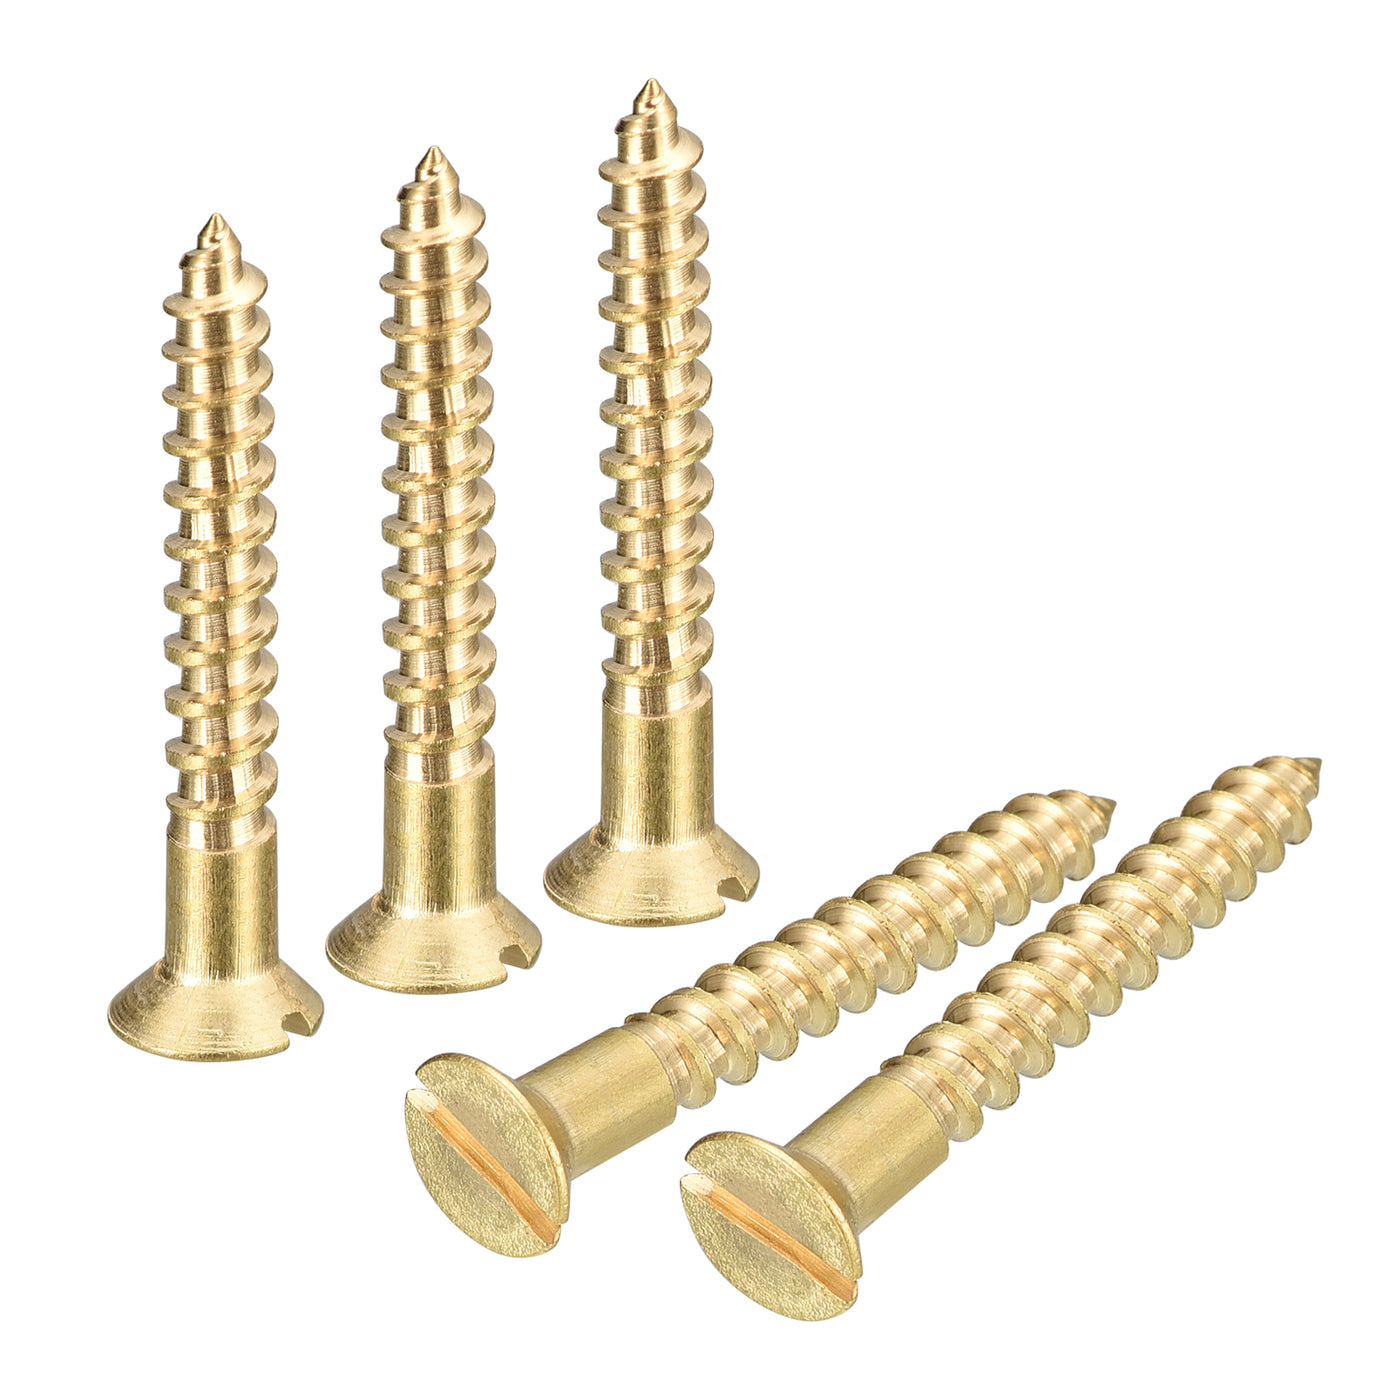 uxcell Uxcell 25Pcs M3.5 x 25mm Brass Slotted Drive Flat Head Wood Screws Self Tapping Screw